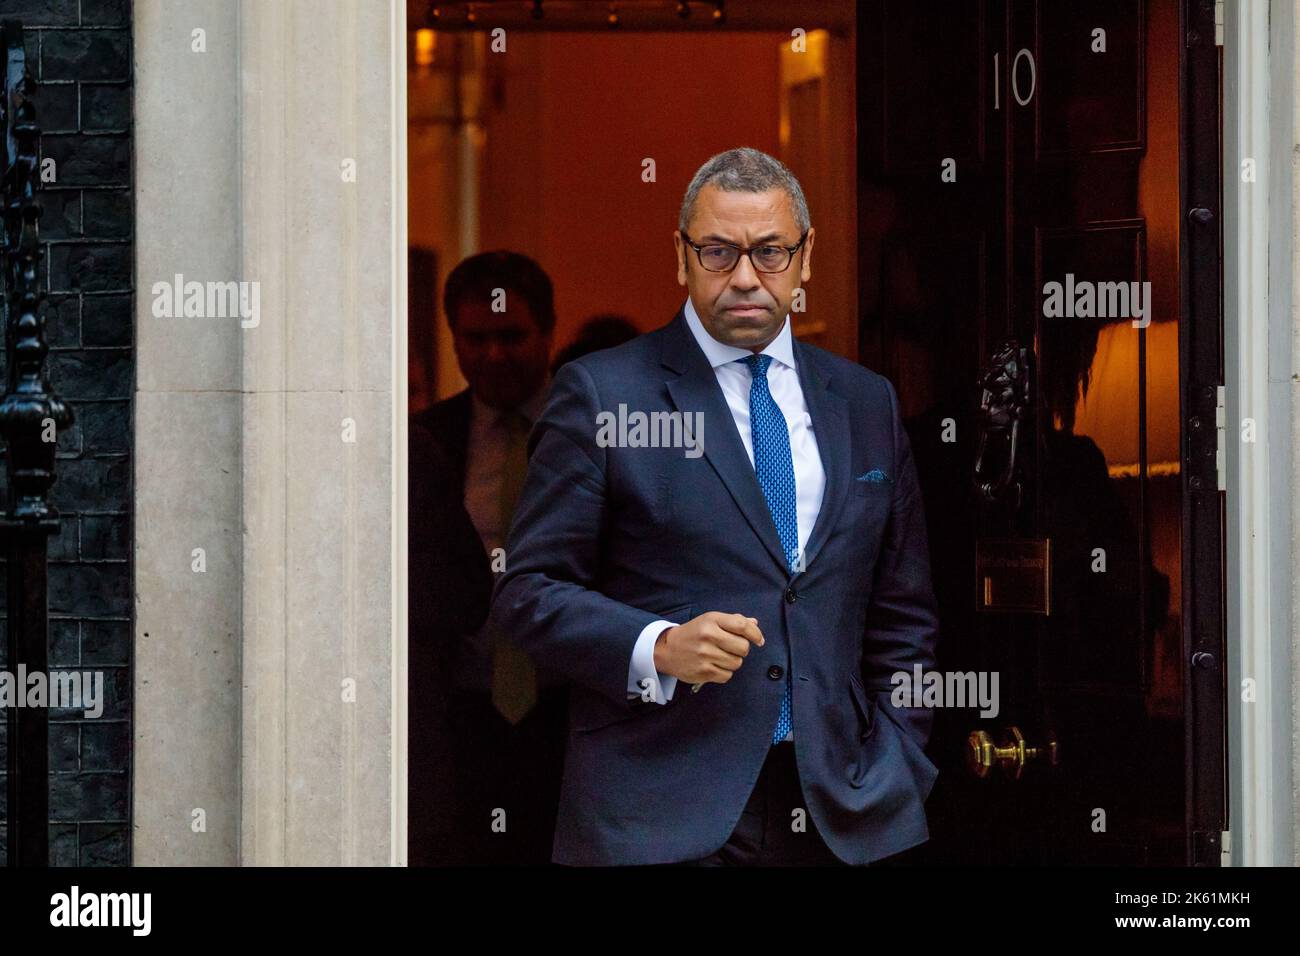 Downing Street, London, UK. 11th October 2022. Ministers attend the first Cabinet Meeting at 10 Downing Street since the Conservative Party Conference last week. James Cleverly MP, Secretary of State for Foreign, Commonwealth and Development Affairs. Amanda Rose/Alamy Live News Stock Photo